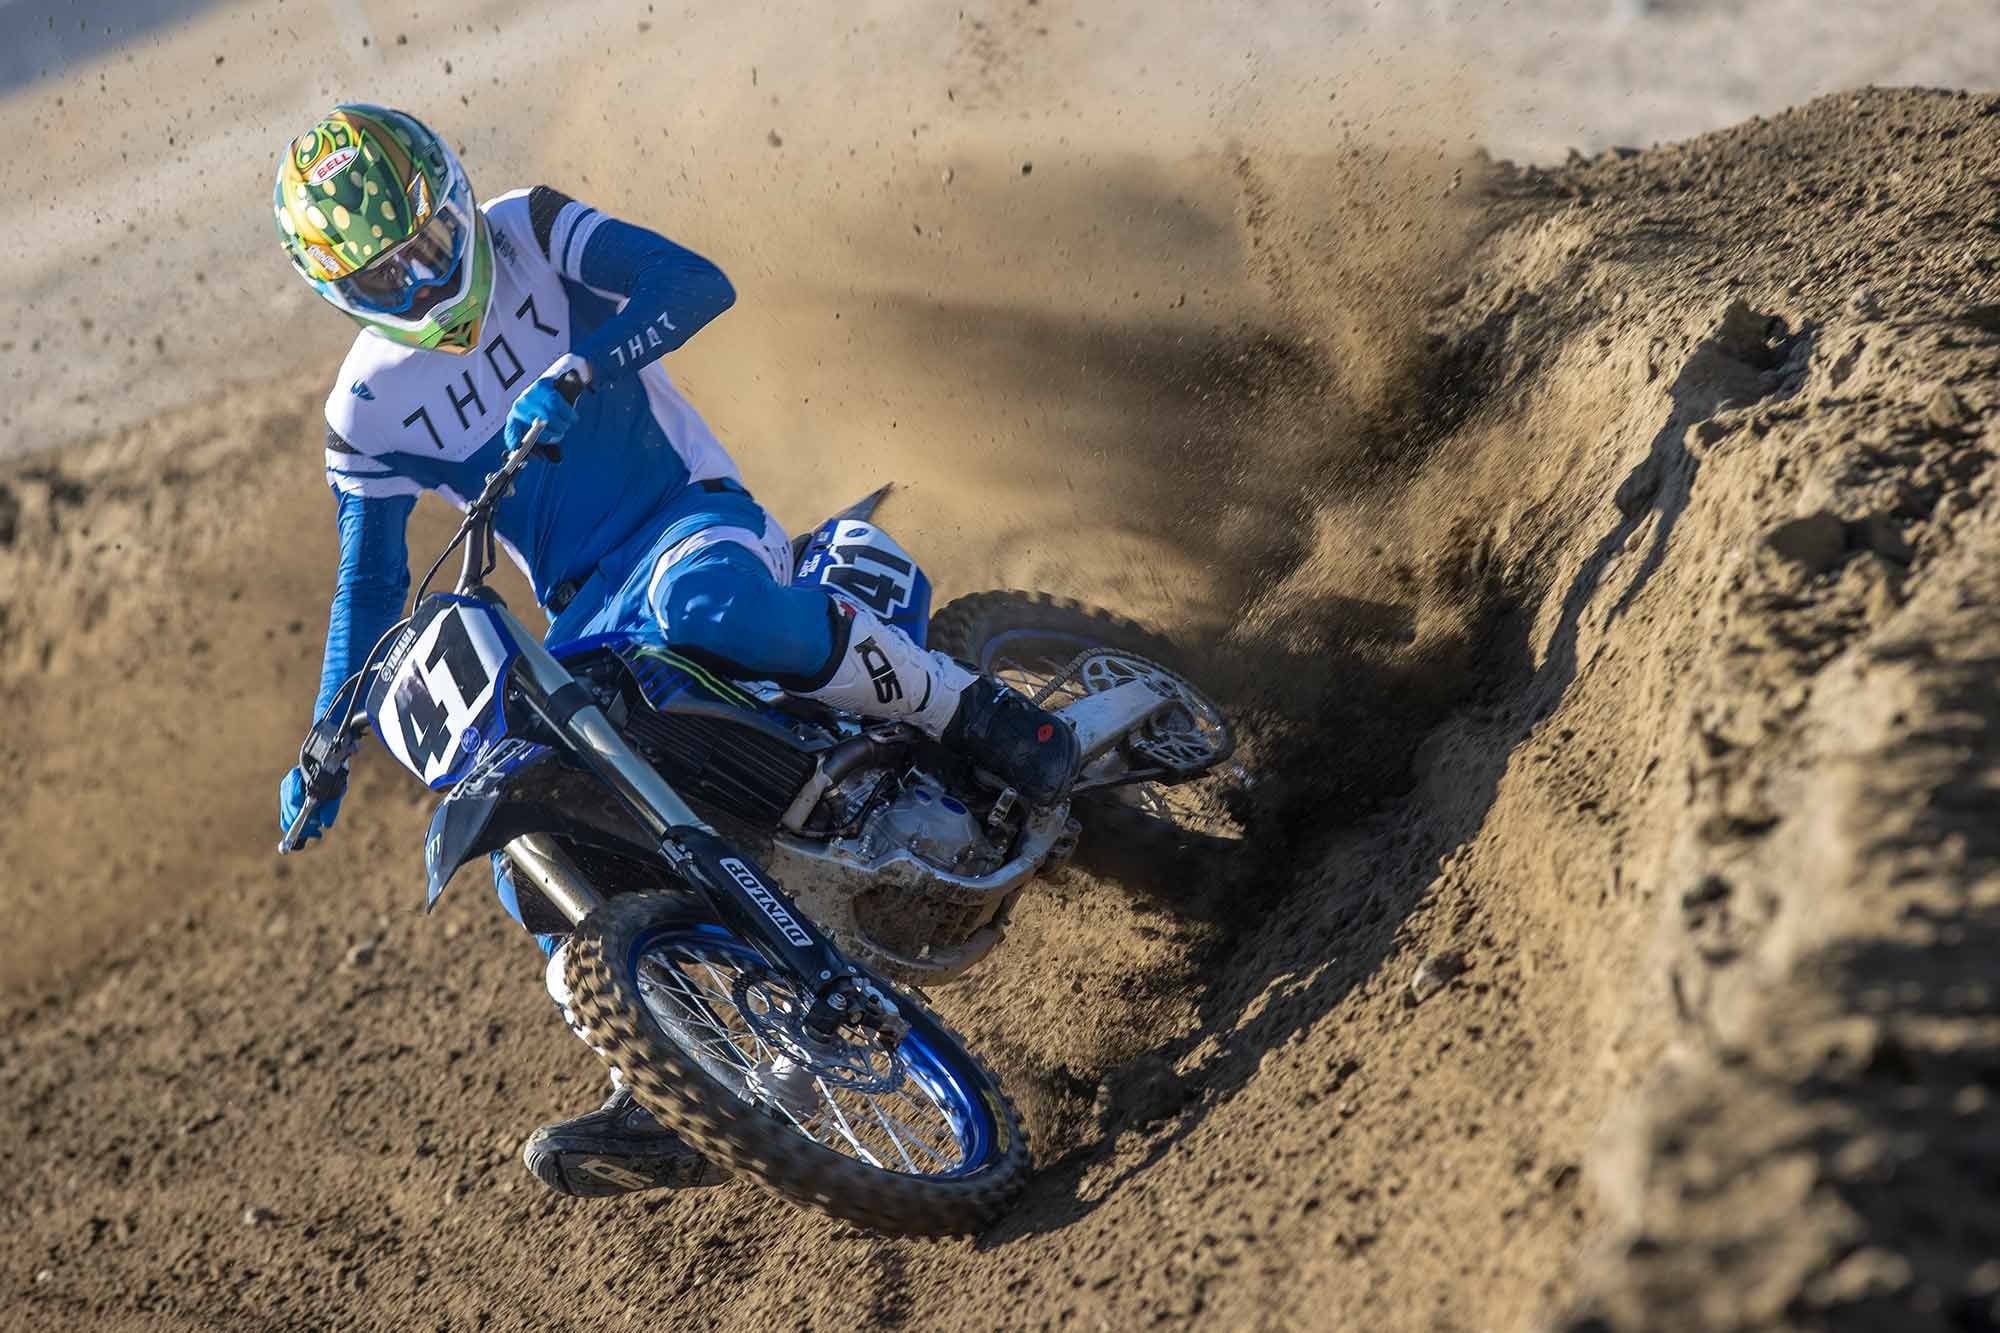 “There’s so much bark as soon as you crack the throttle on the YZ450F, which makes it intimidating. I was hoping it would be a little easier to control this year versus last year.” <i>—Allan Brown</i>